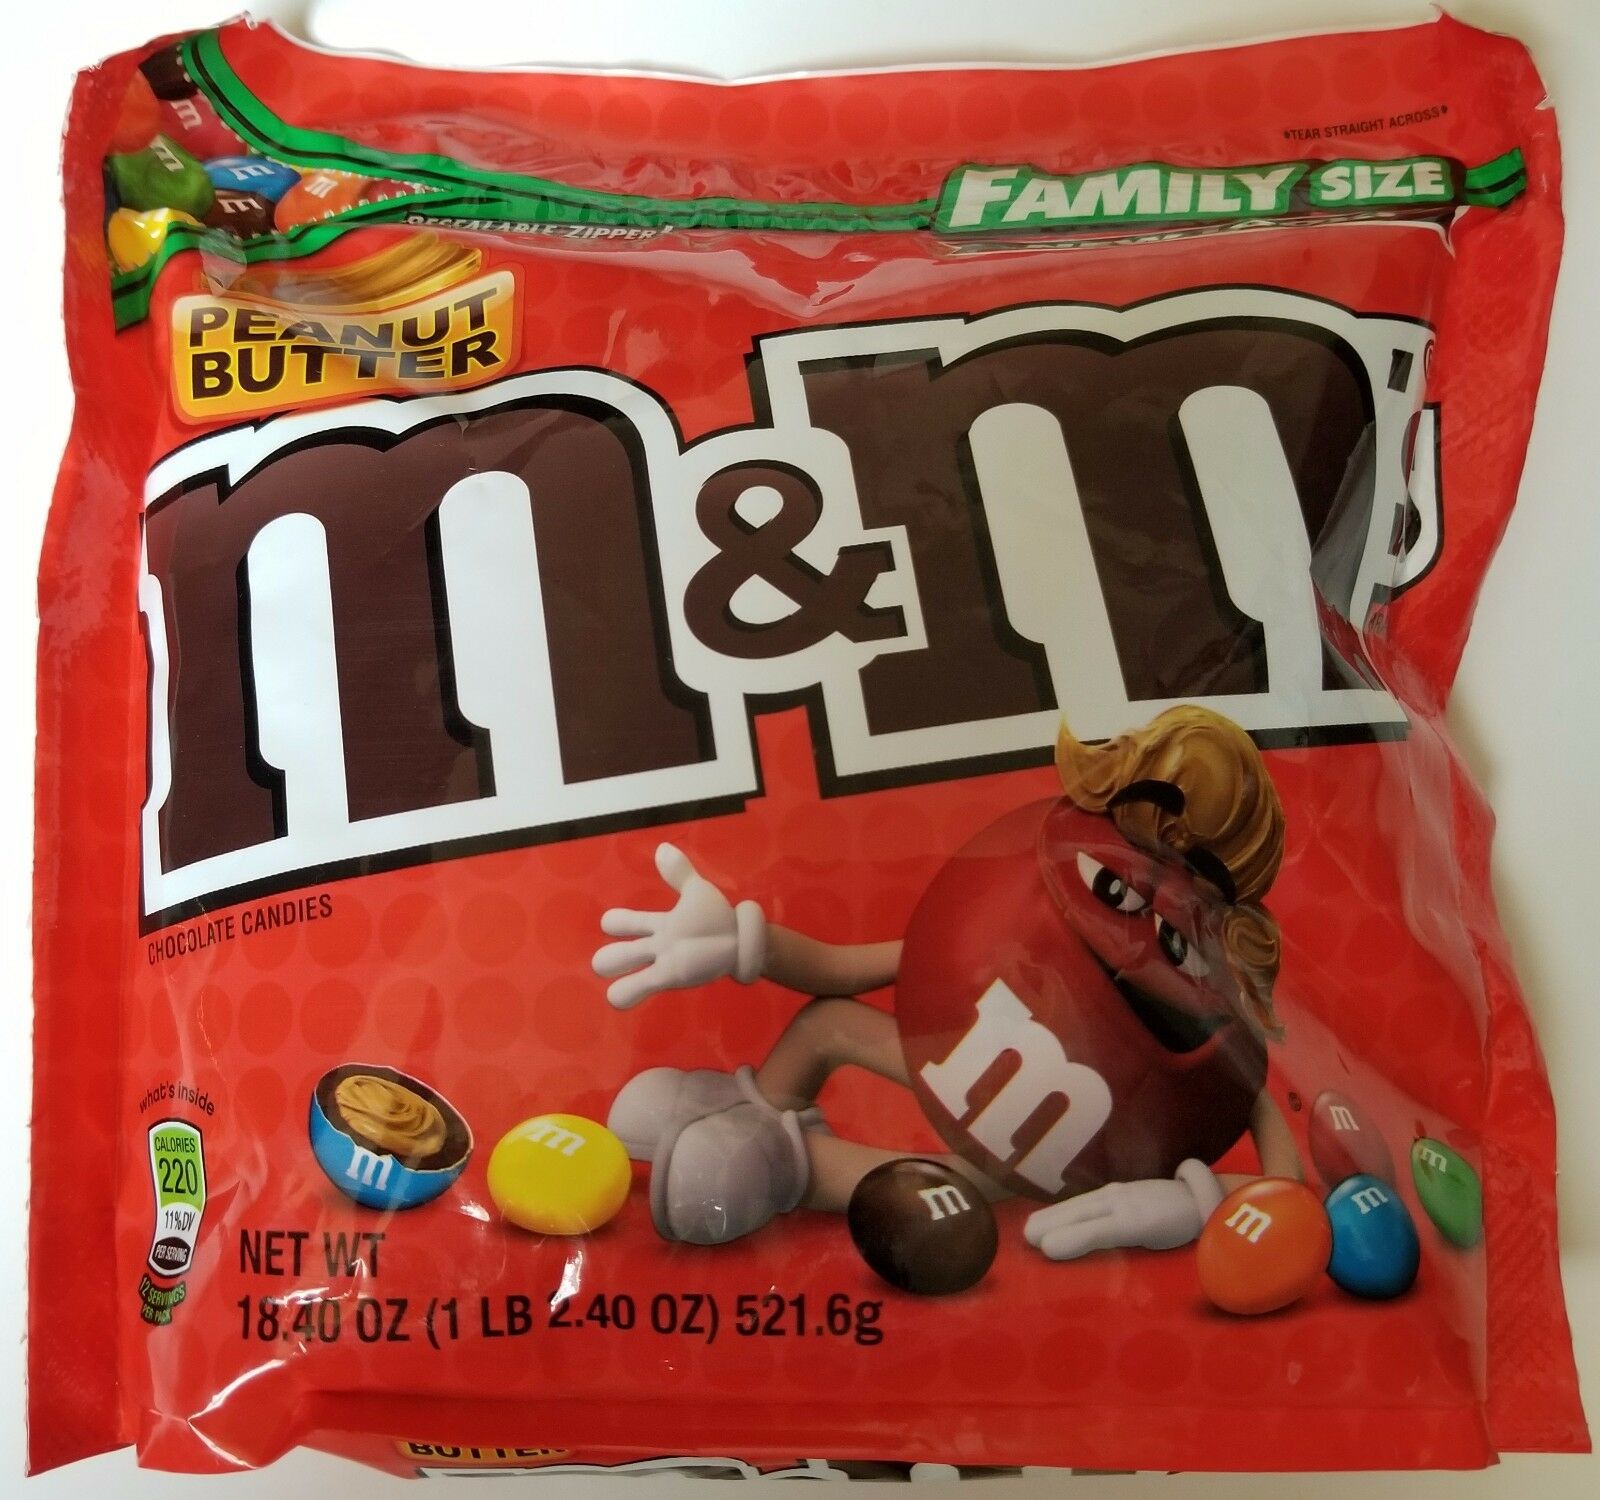 New Sealed Peanut Butter M&m's Family Size 18.40 Oz Bag Free Worldwide Shipping